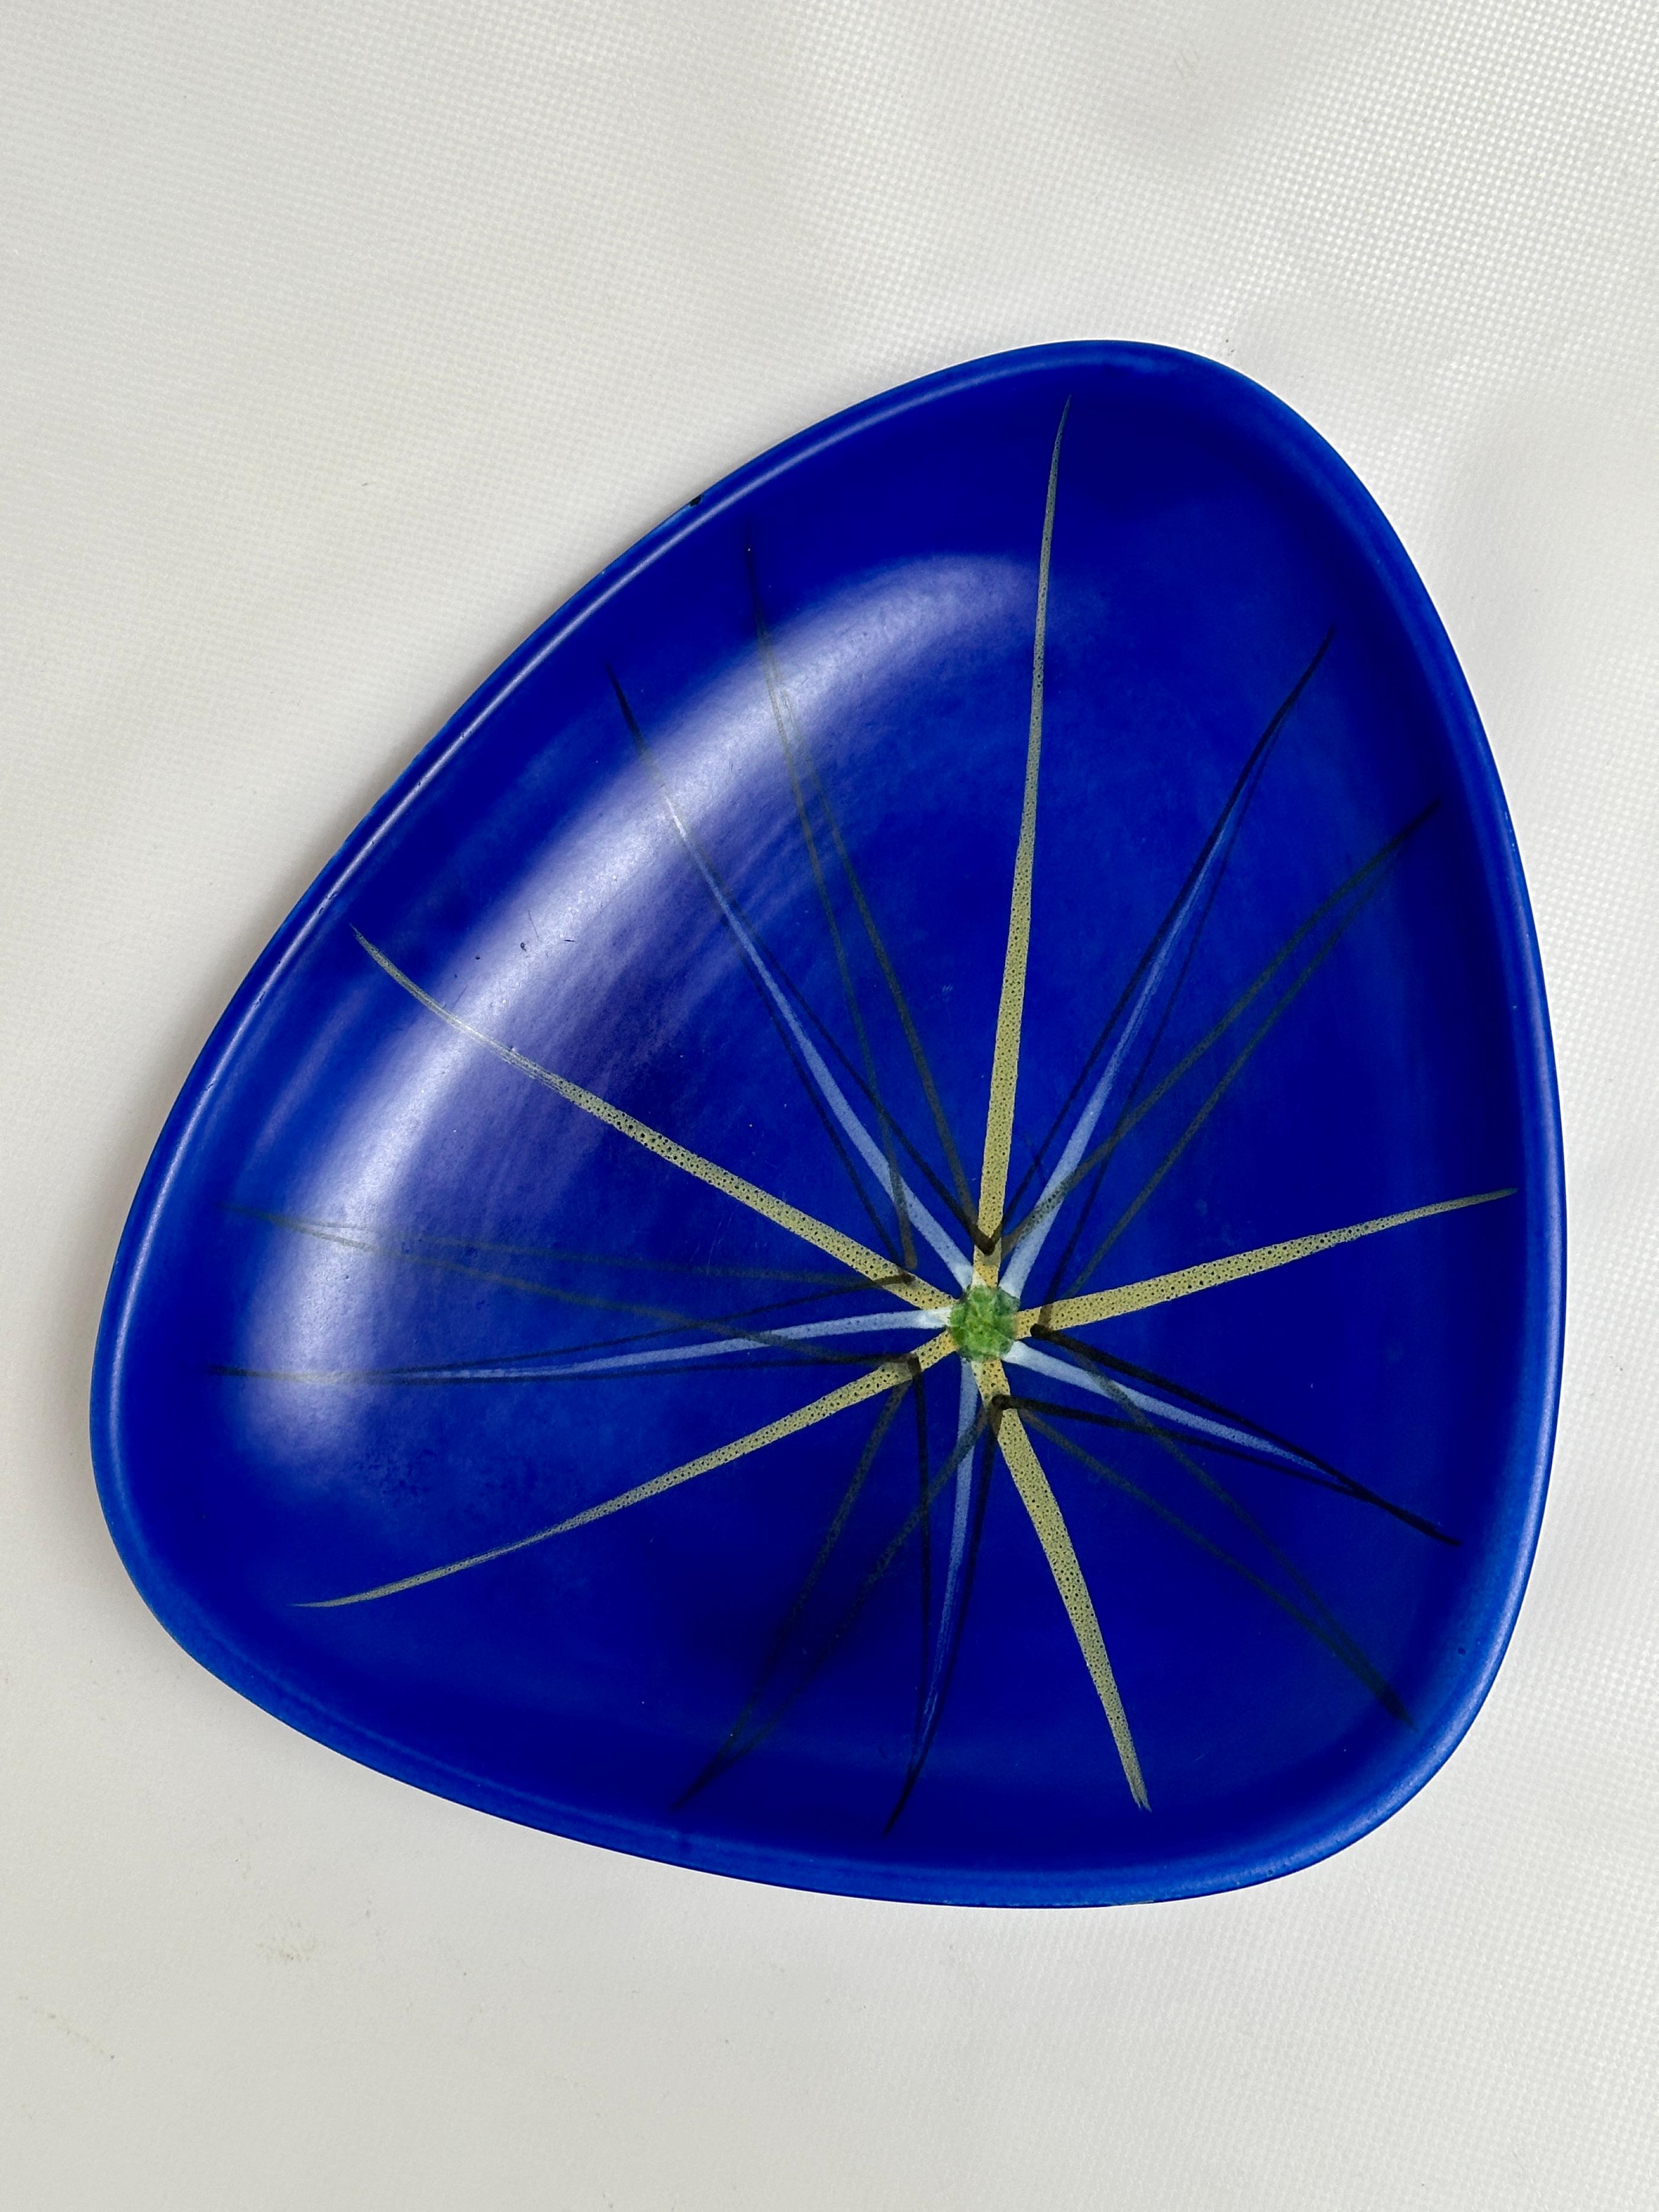 French Large Free-Form Decorative Bowl, Andre Baud, Vallauris c. 1950 For Sale